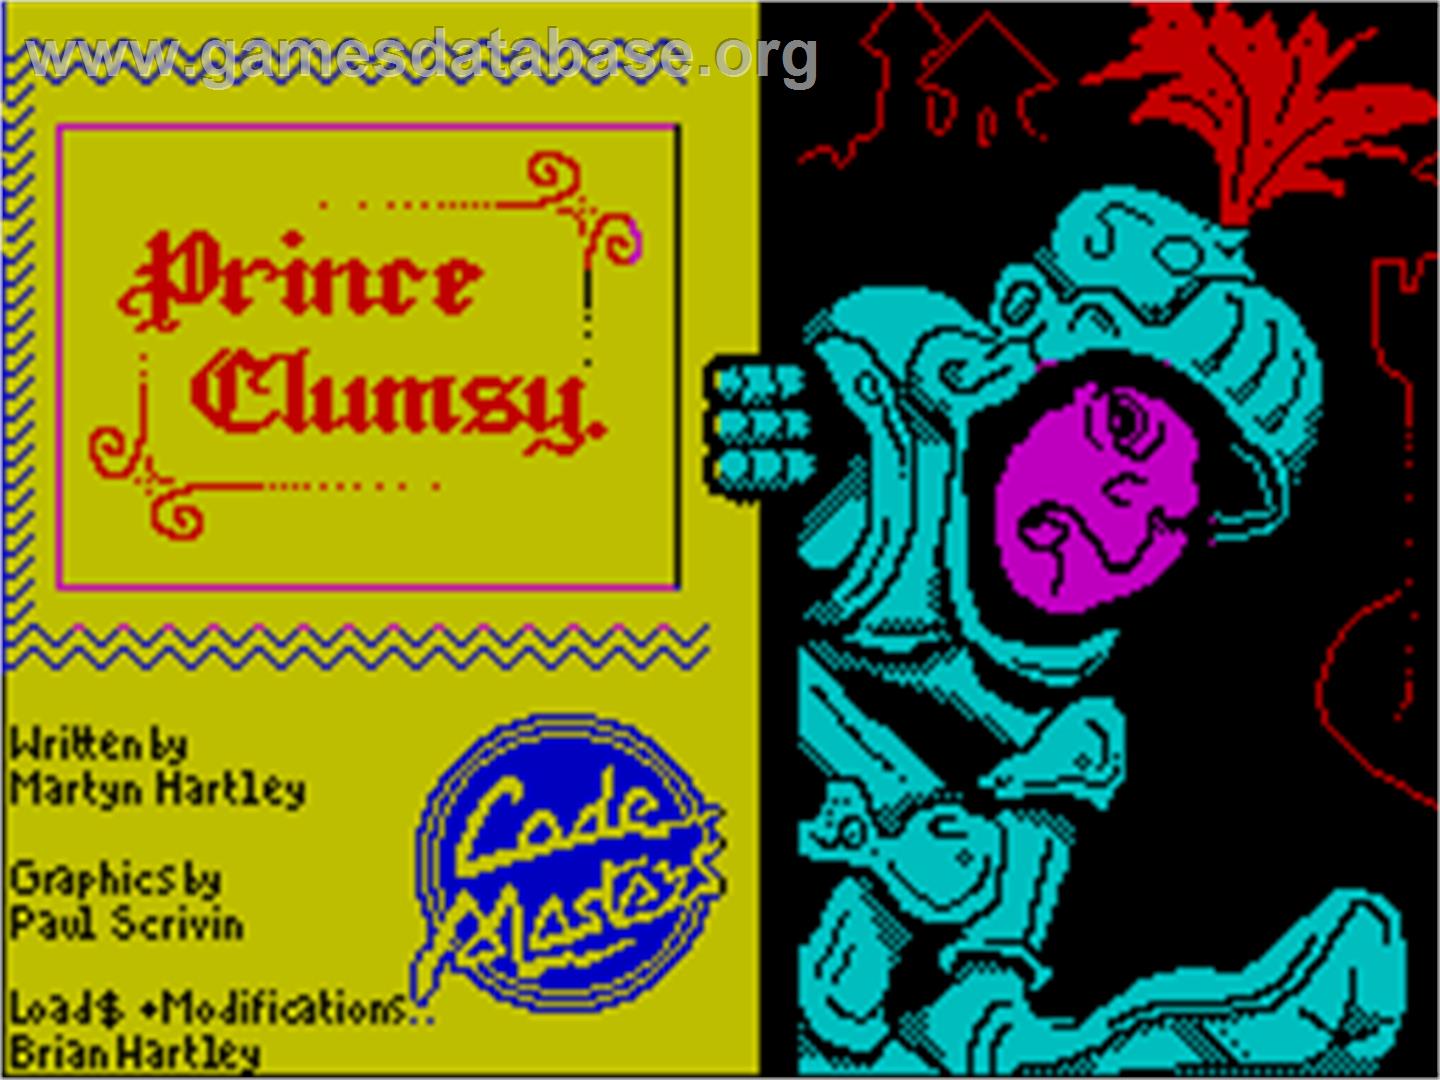 Prince Clumsy - Sinclair ZX Spectrum - Artwork - Title Screen